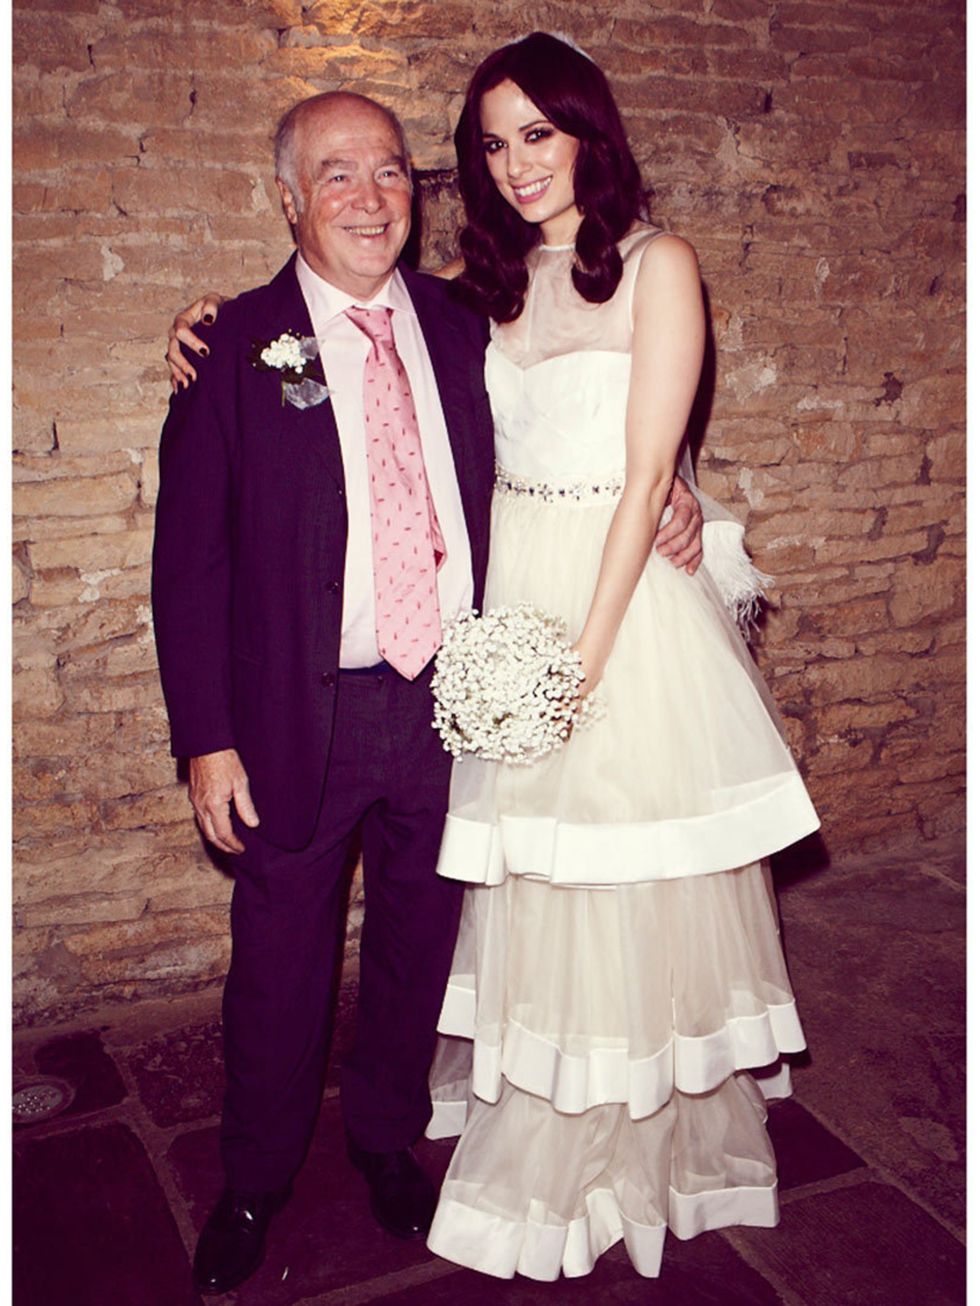 <p>My dear dad, the absolute best man I know by miles, and benchmark for all who followed him. Sorry husband - Sophie Beresiner, Beauty Director.</p>